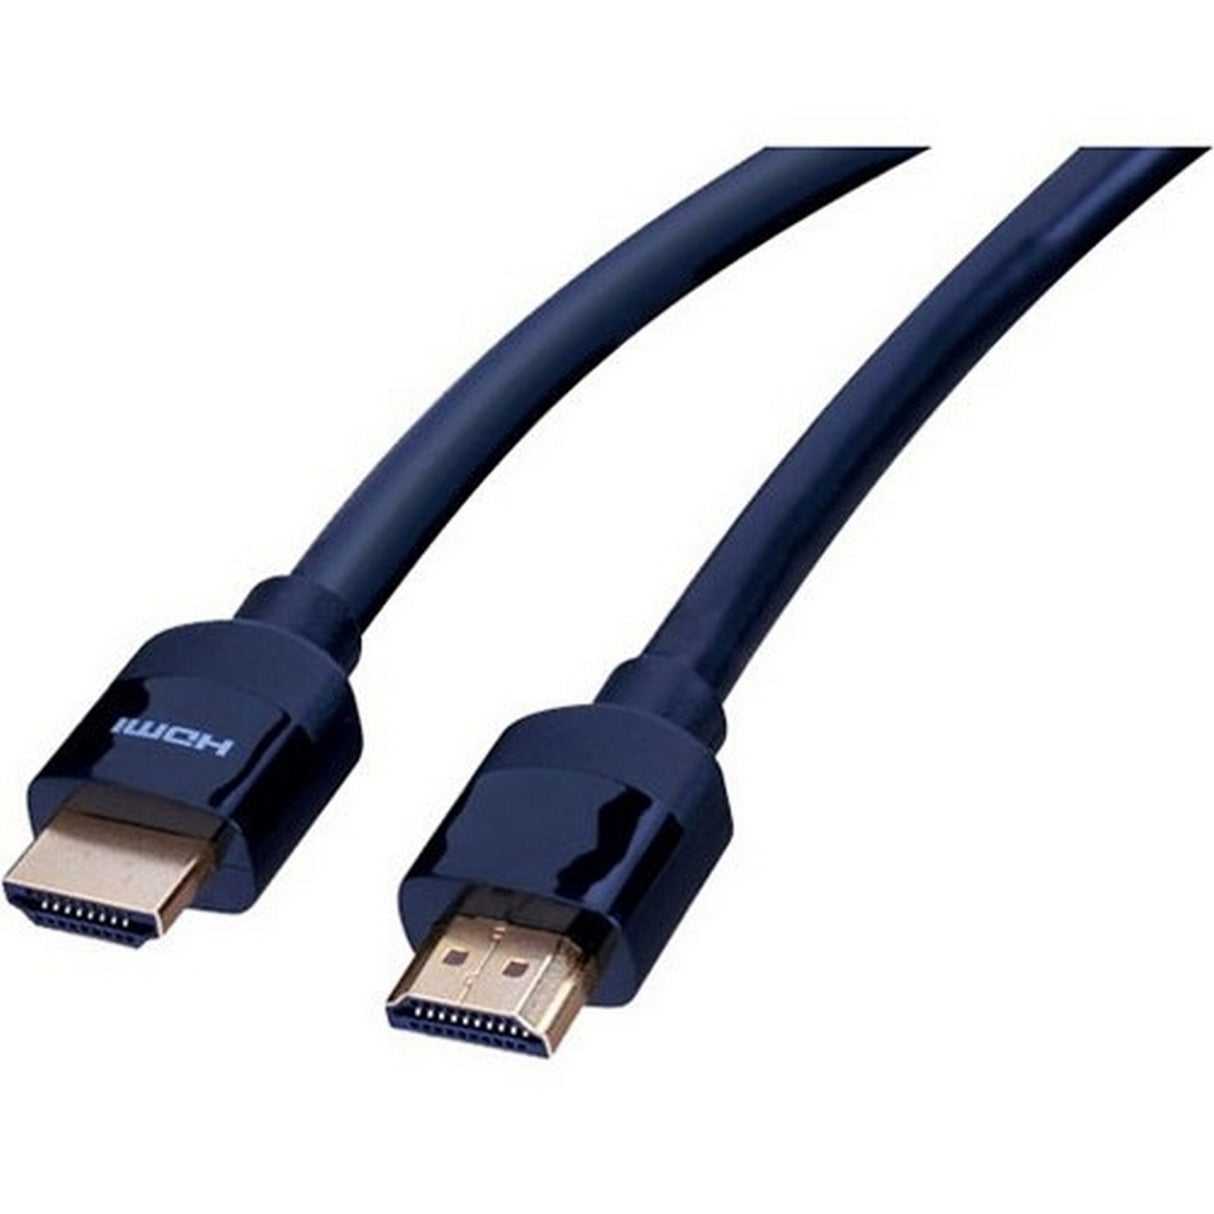 W Box HDMIP25 UHD 4K HDMI Cable with Ethernet, 25-Foot